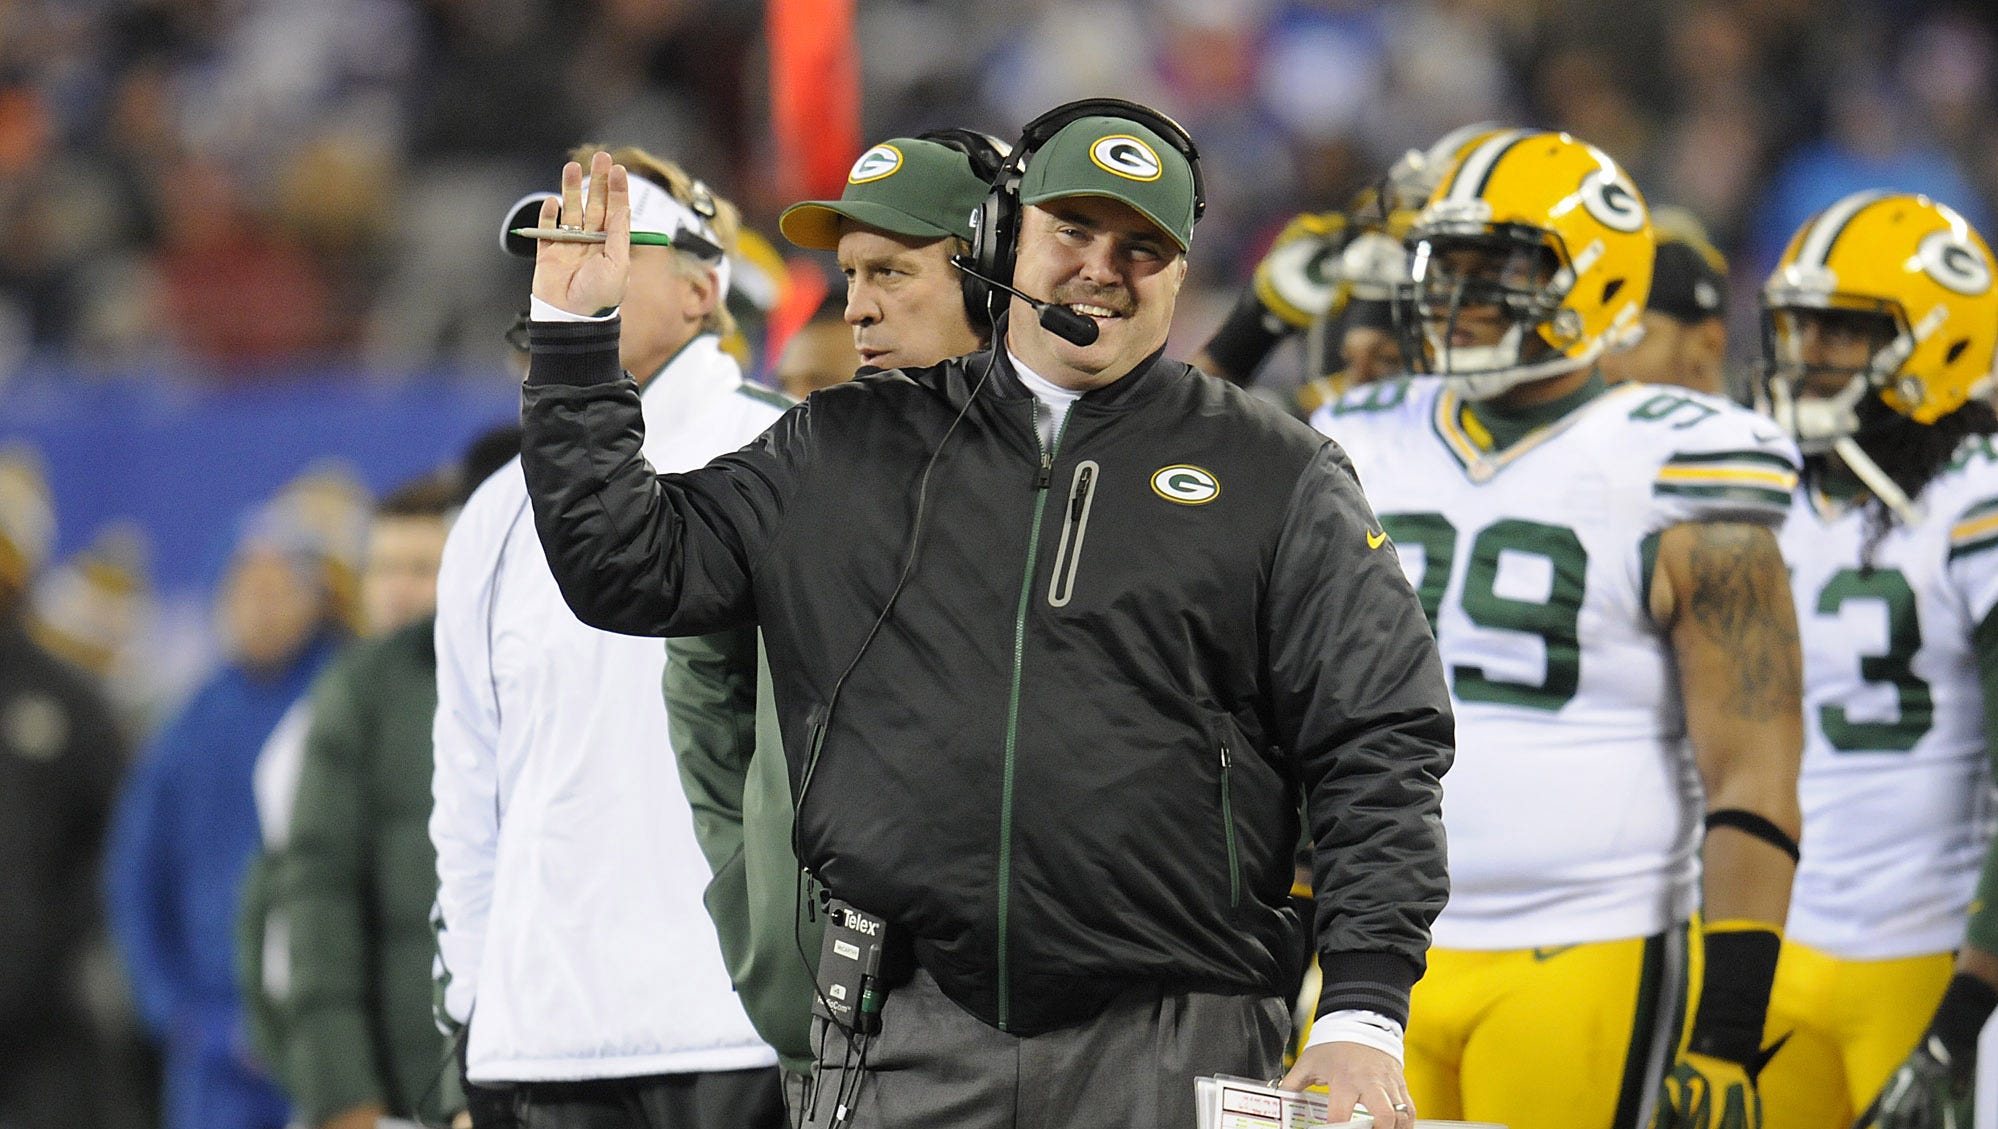 Green Bay Packers coach Mike McCarthy reacts after a penalty was called on the Packers during a game at MetLife Stadium in East Rutherford, N.J.